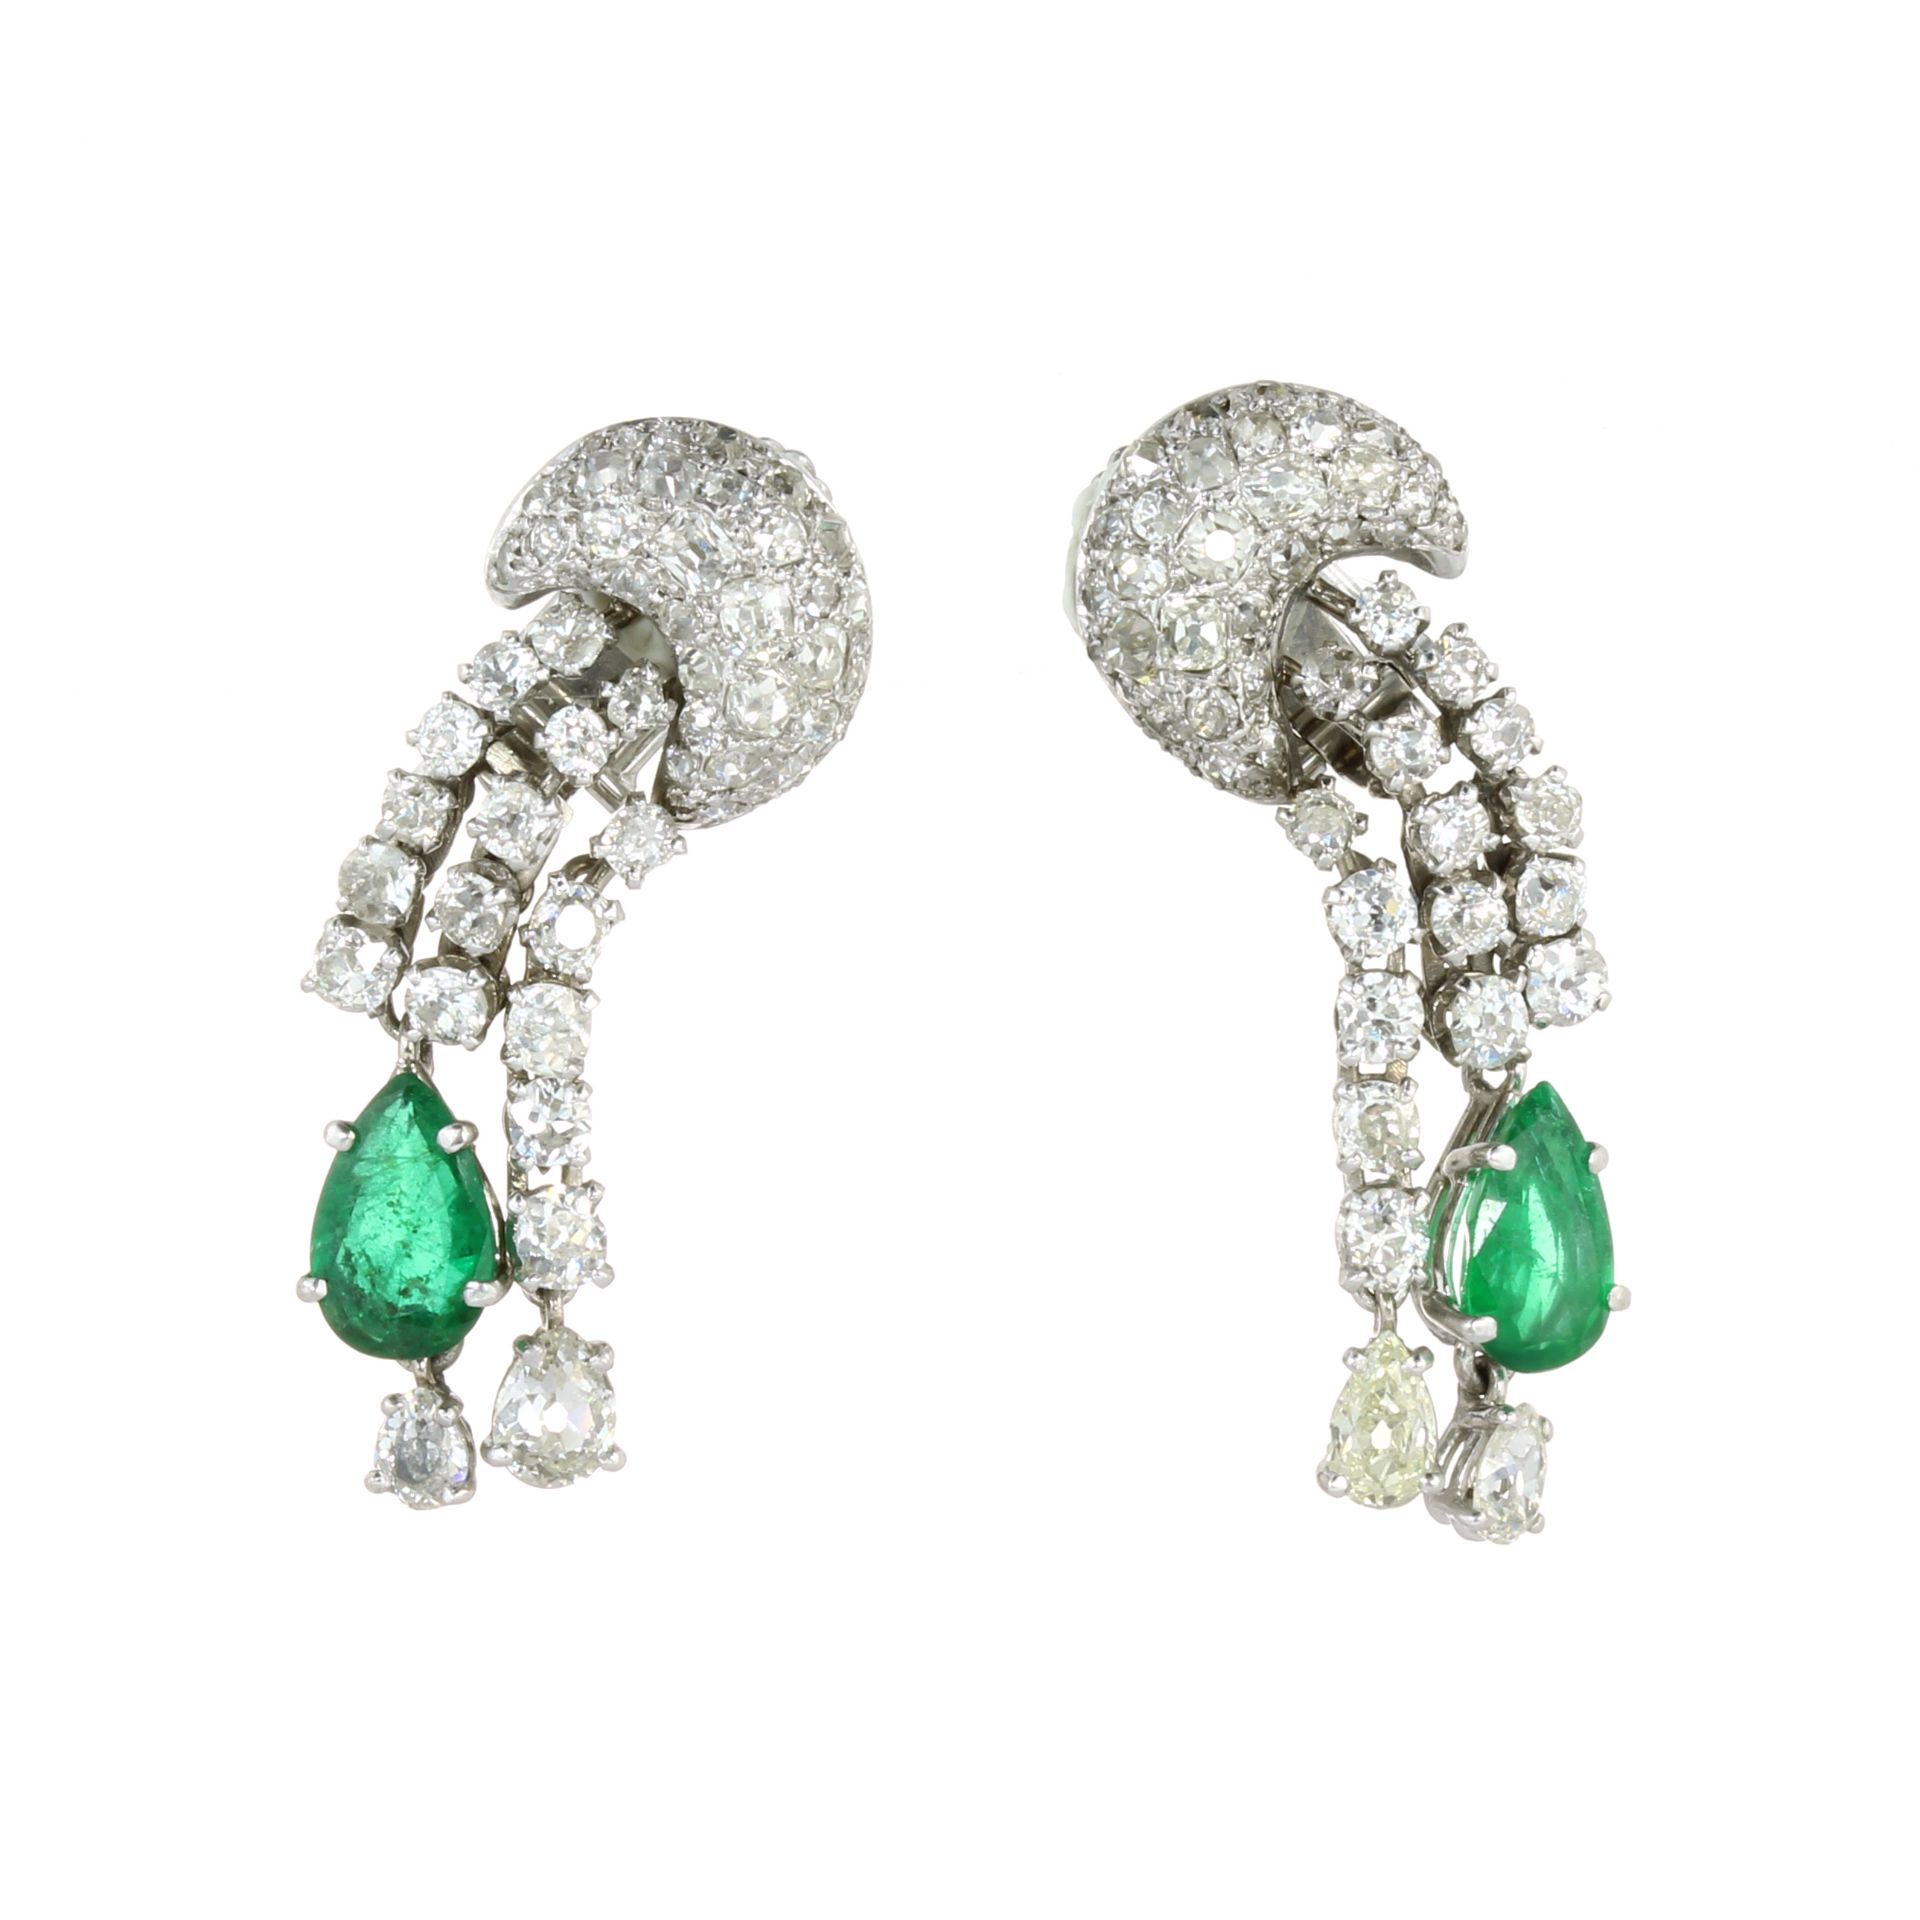 A PAIR OF EMERALD AND DIAMOND CLIP EARRINGS, PIERRE STERLÉ in 18ct white gold each set with a pear